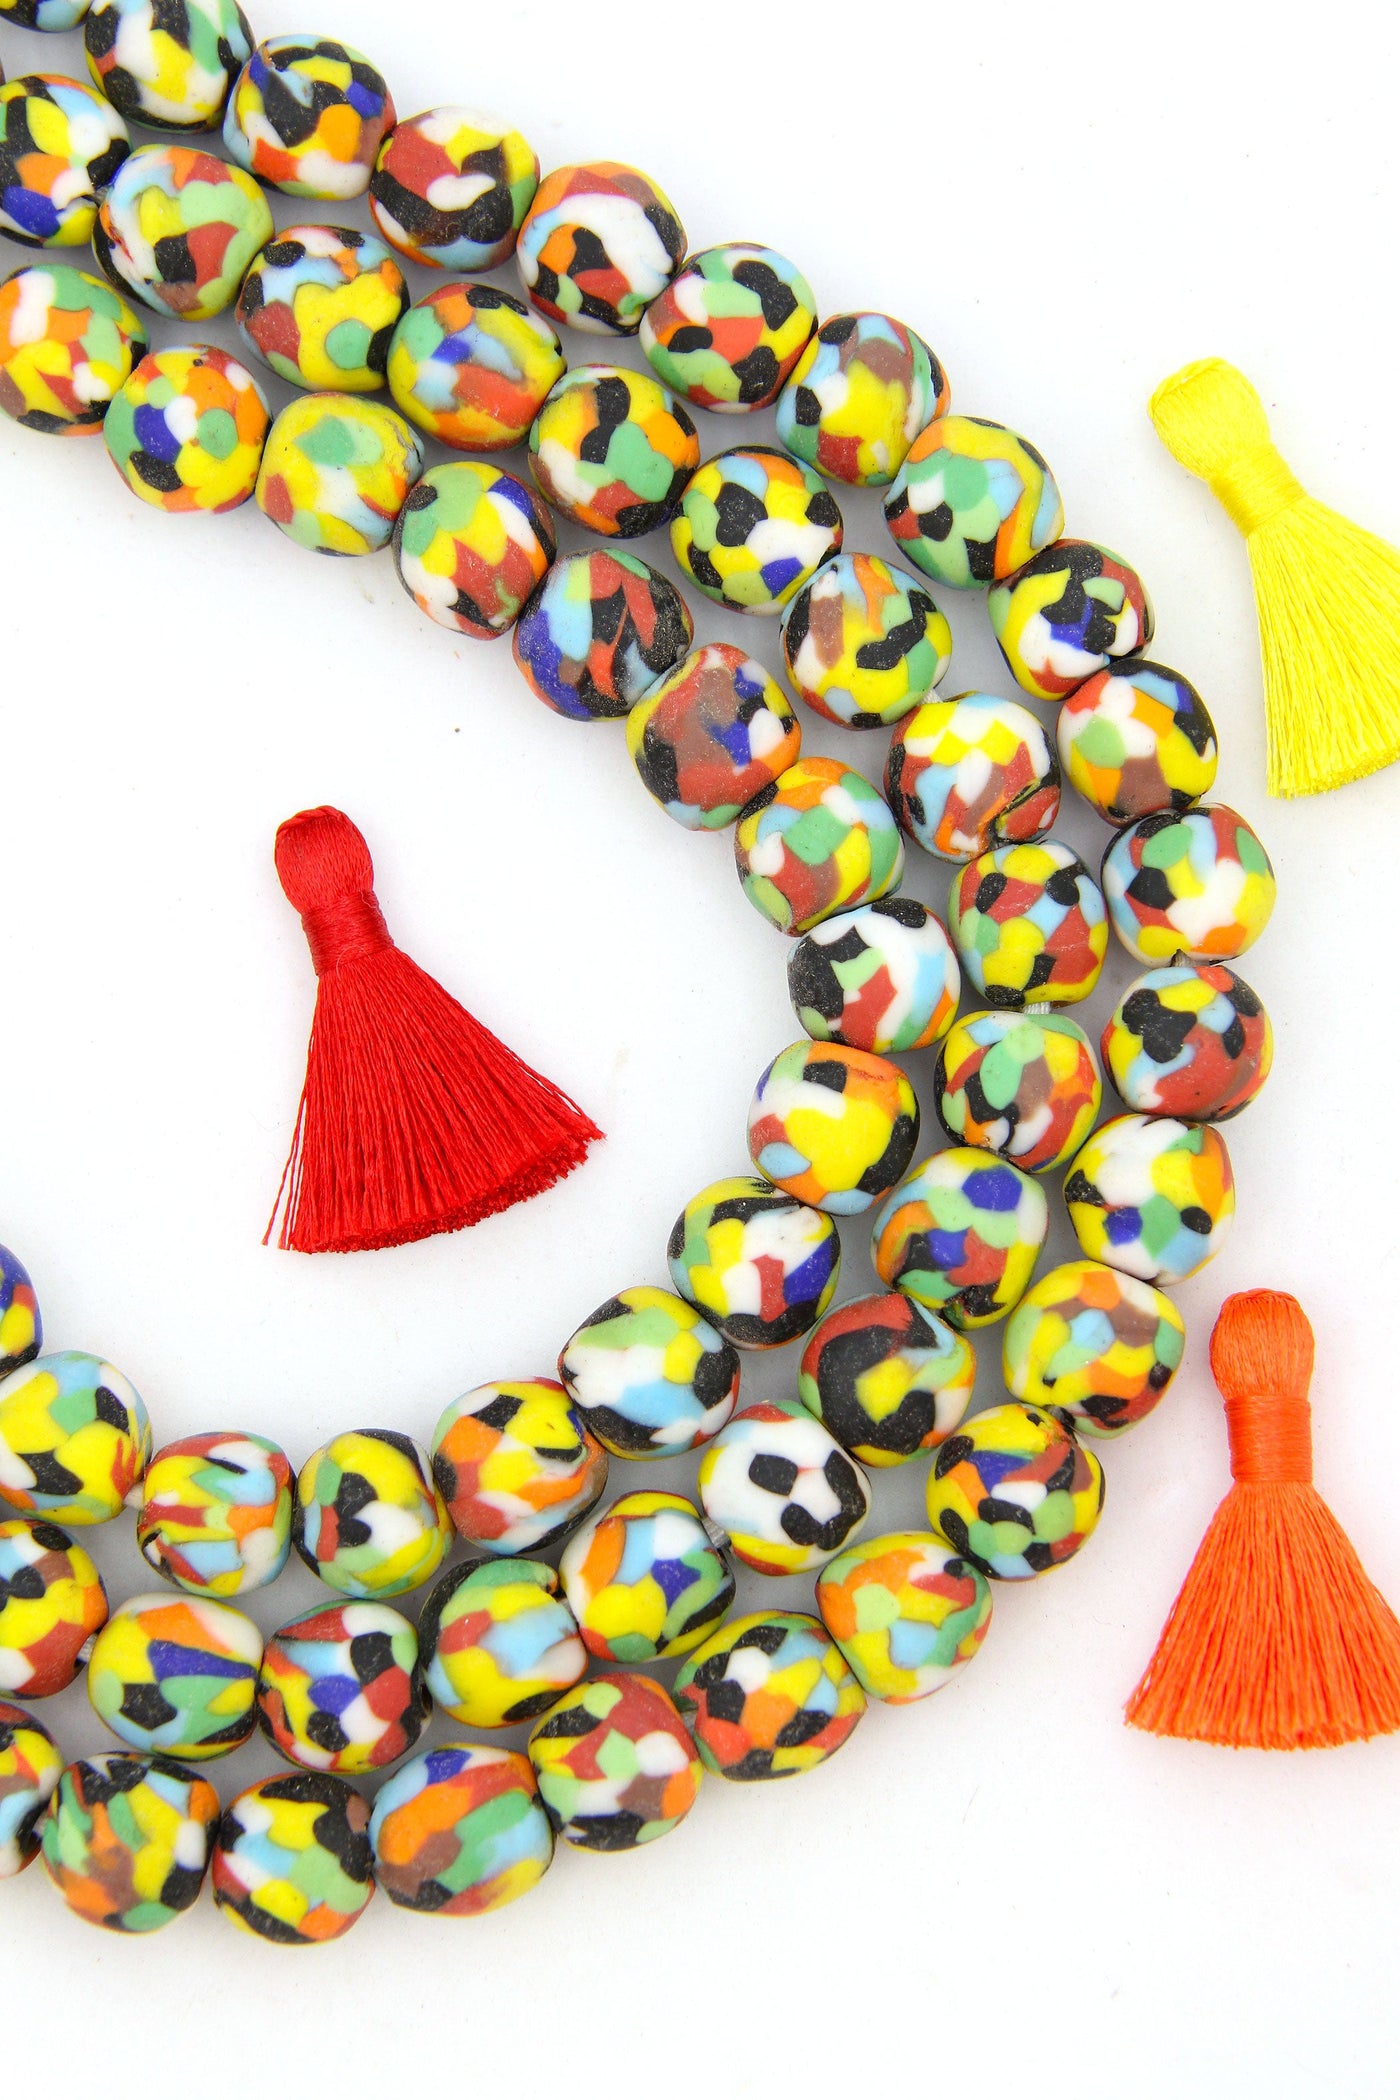 Bright Medley Fused Recycled Glass Beads 14mm: Eco-Friendly Beads